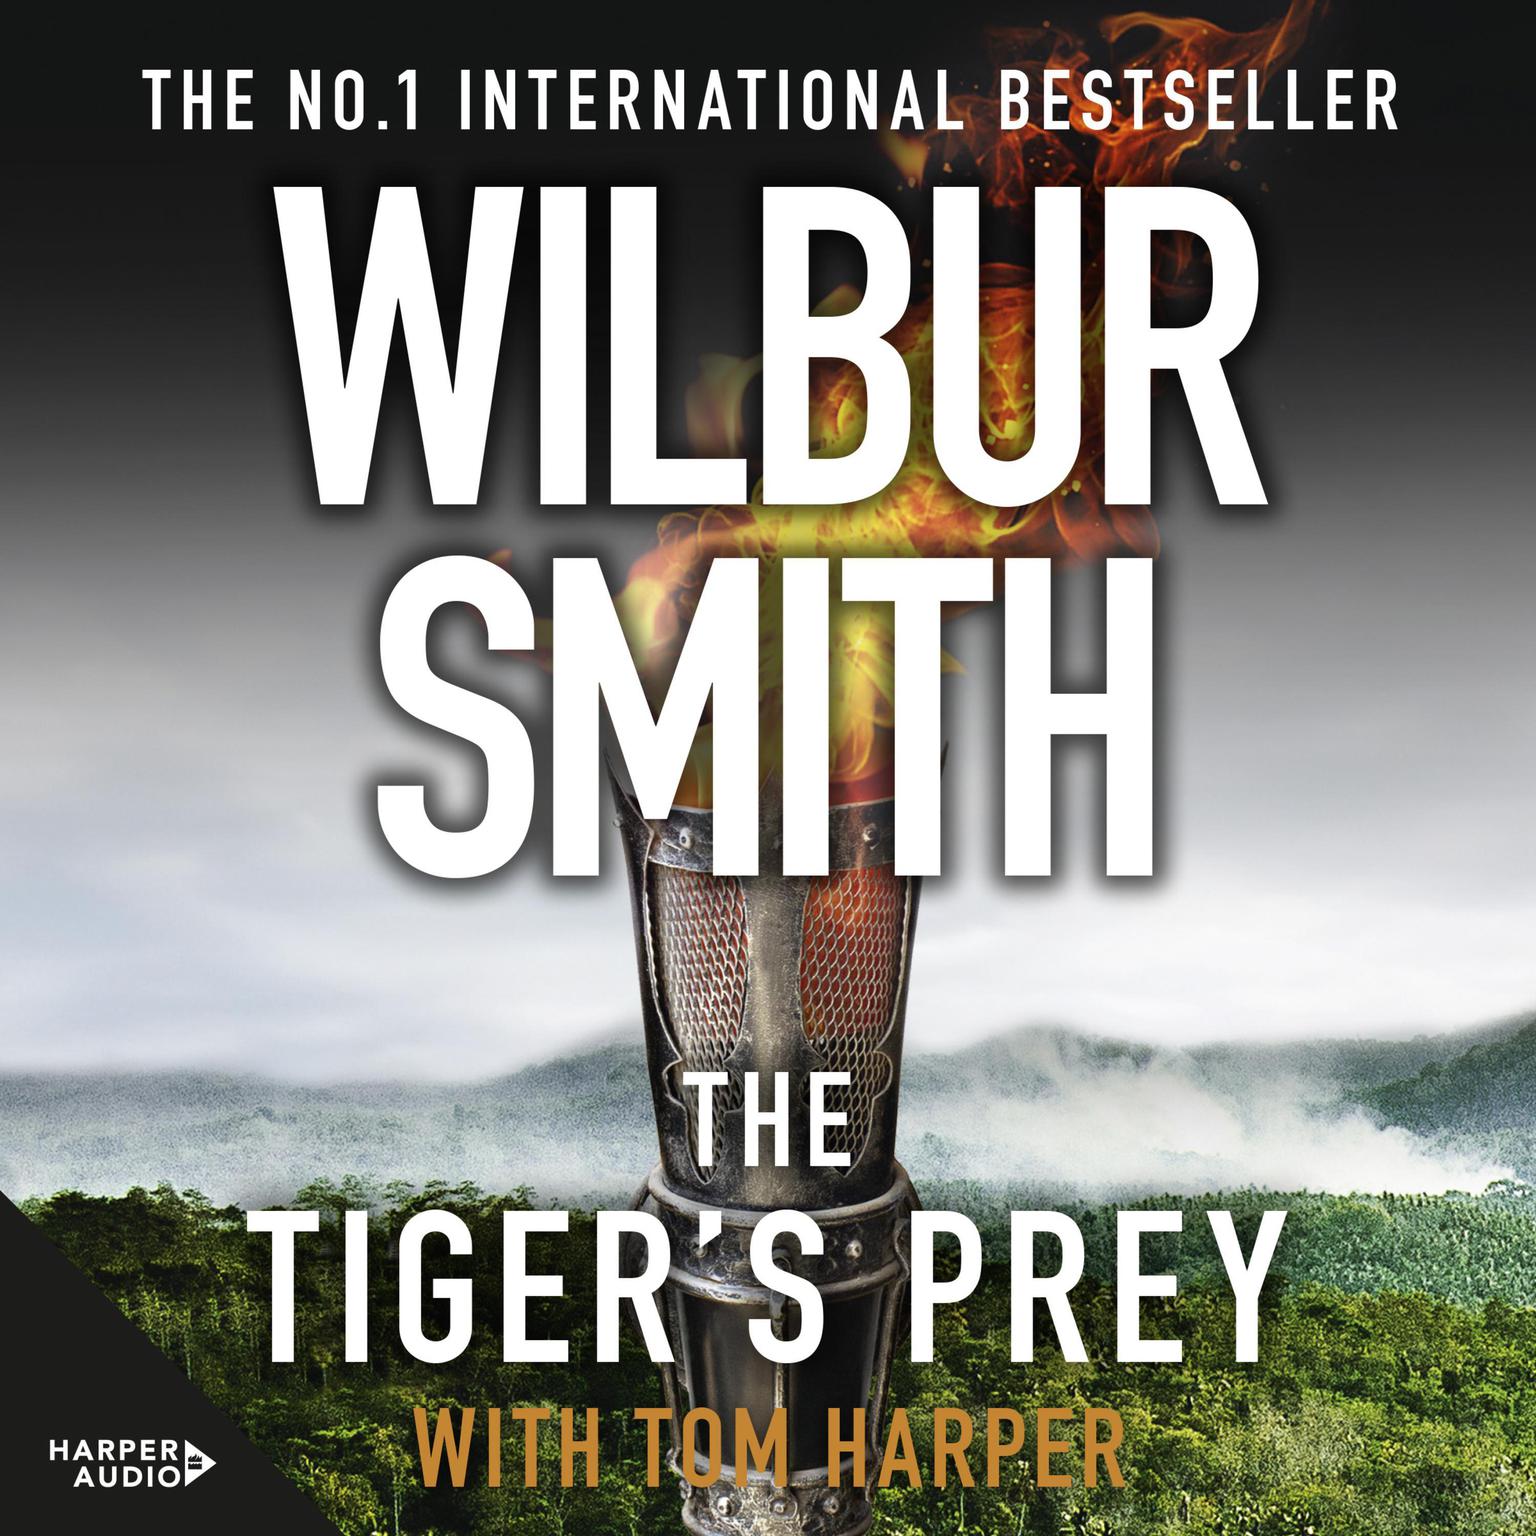 The Tiger S Prey Audiobook By Wilbur Smith Listen Now